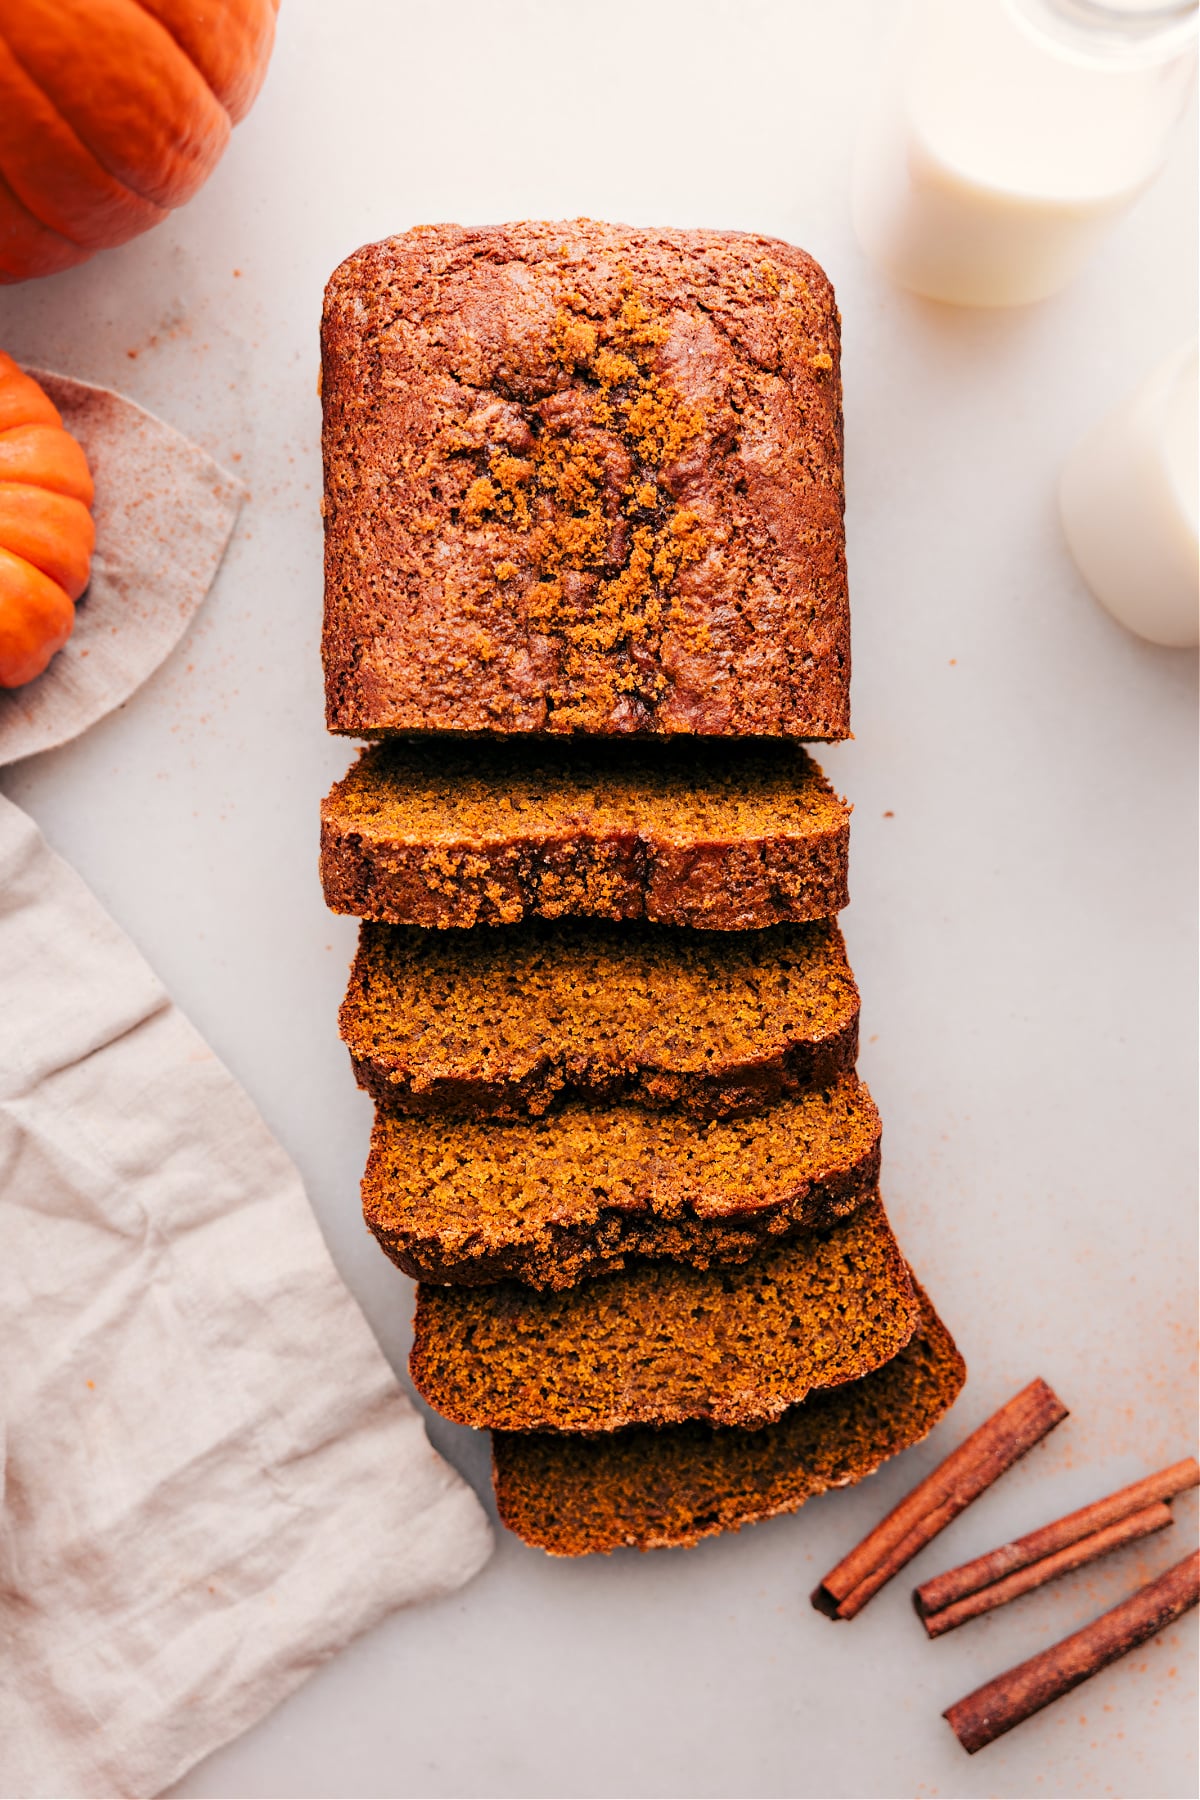 Overhead view of a loaf of pumpkin bread, with half sliced into individual pieces.